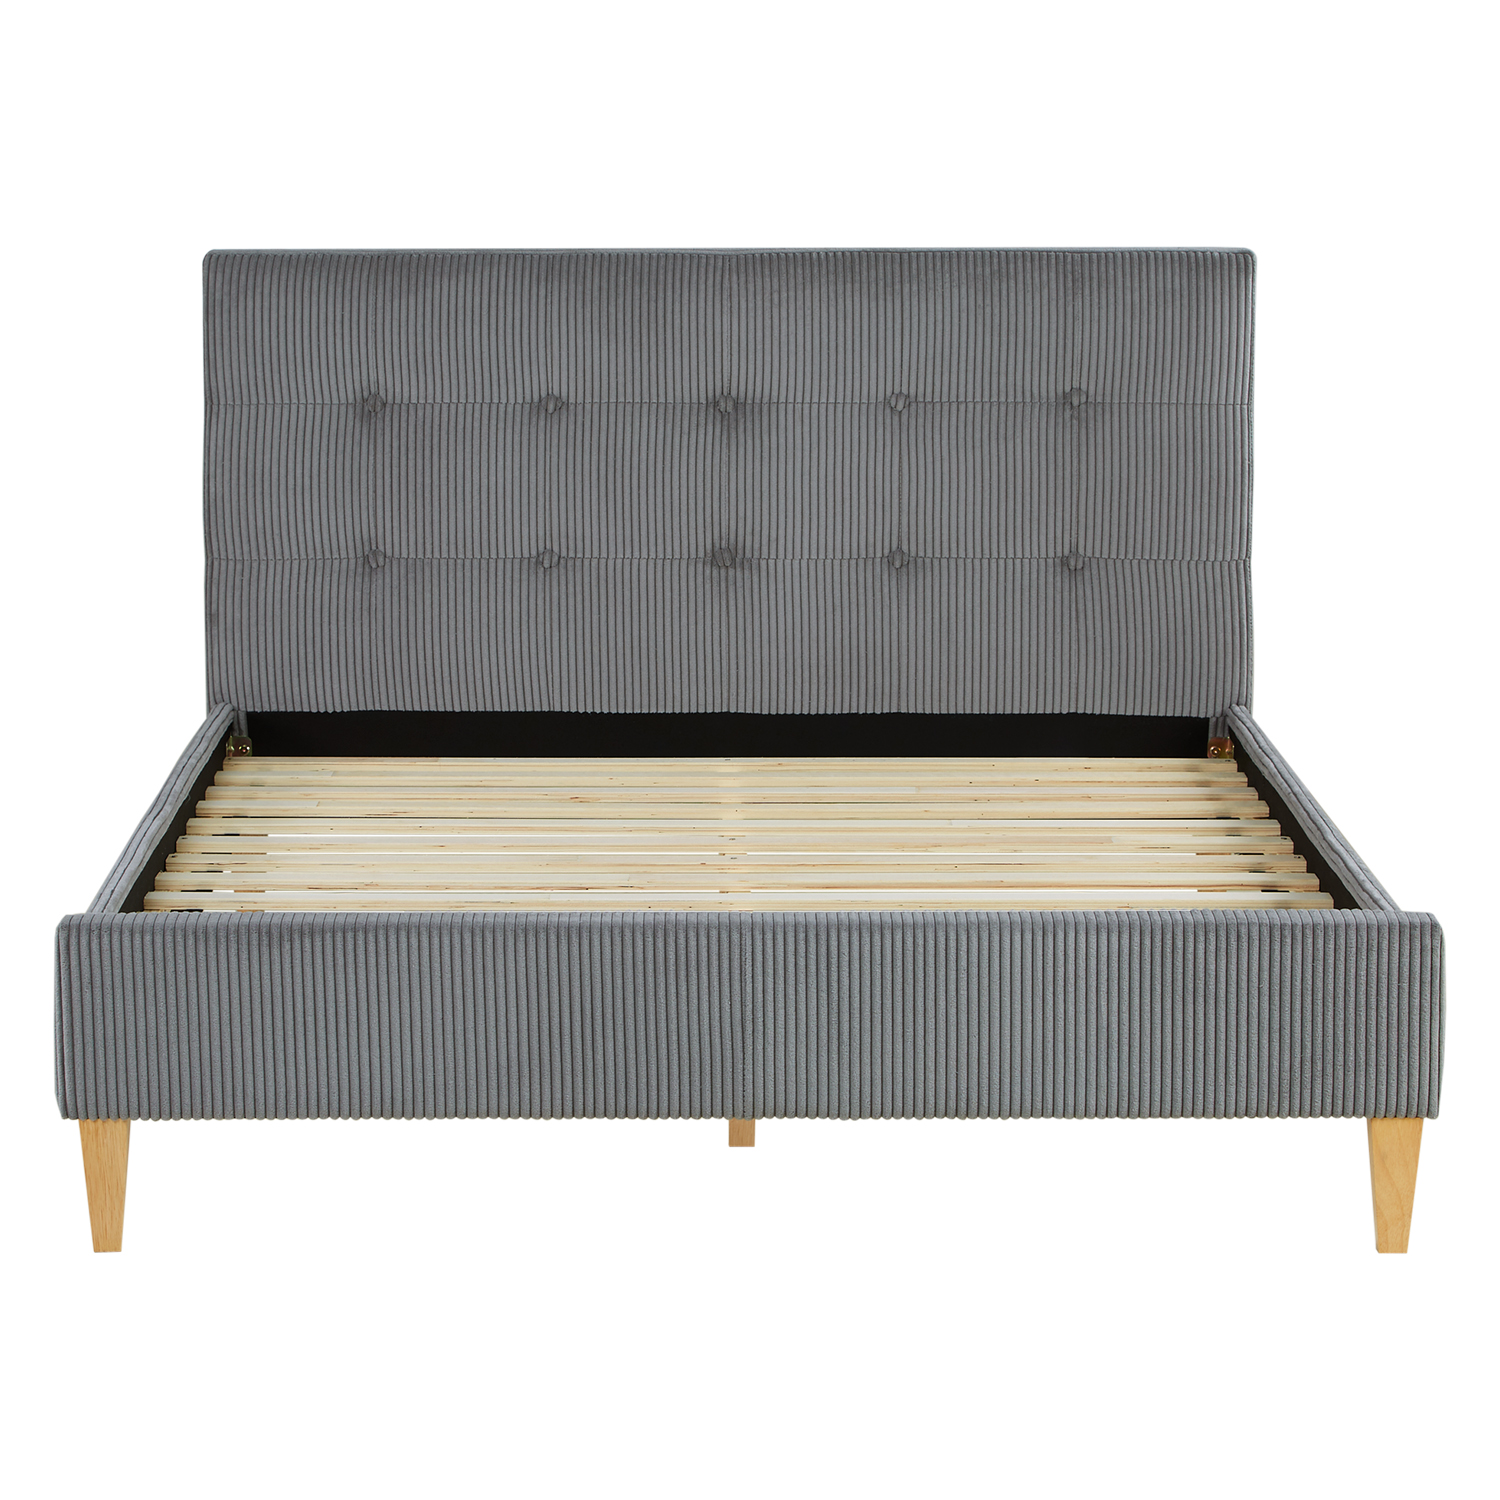 Small Double Bed 140x200 cm with Mattress Upholstered Bed Grey Cord with Slatted Frame Fabric Bed Frame